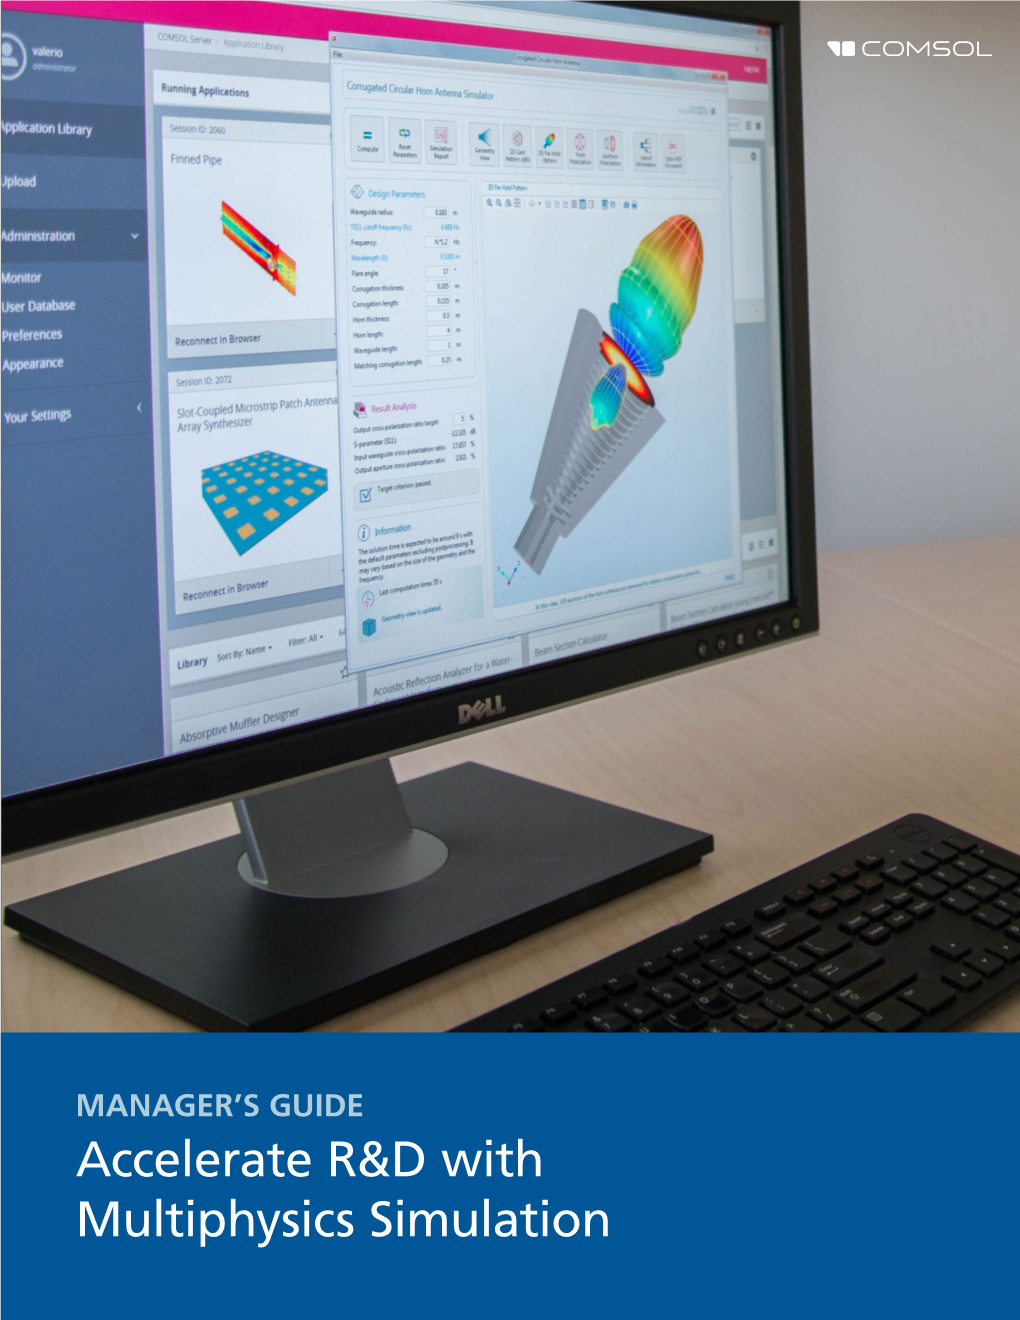 Accelerate R&D with Multiphysics Simulation